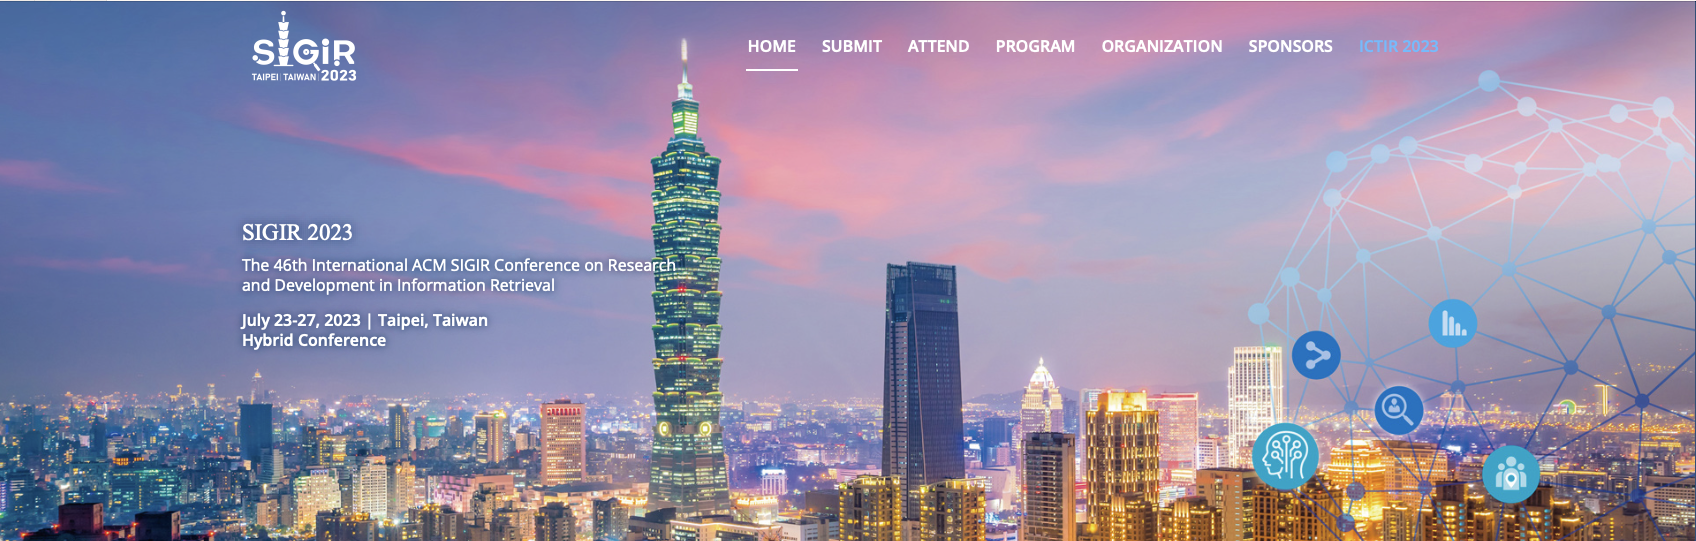 Two Workshop Proposals Accepted at SIGIR 2023 in Taipei (Taiwan)